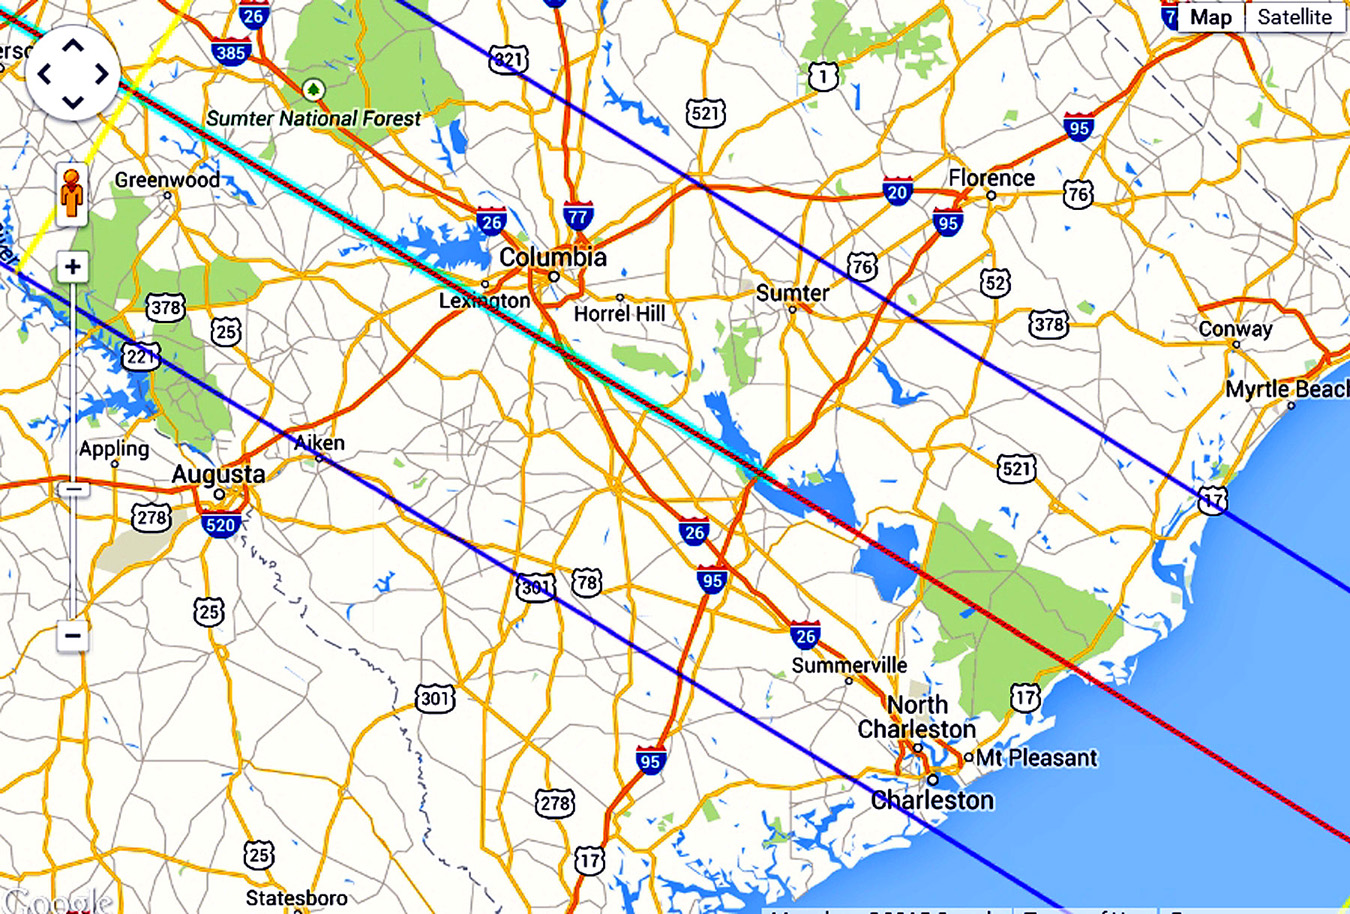 August 21, 2017, Path of Solar Eclipse Totality Across South Carolina - Columbia to Charlston